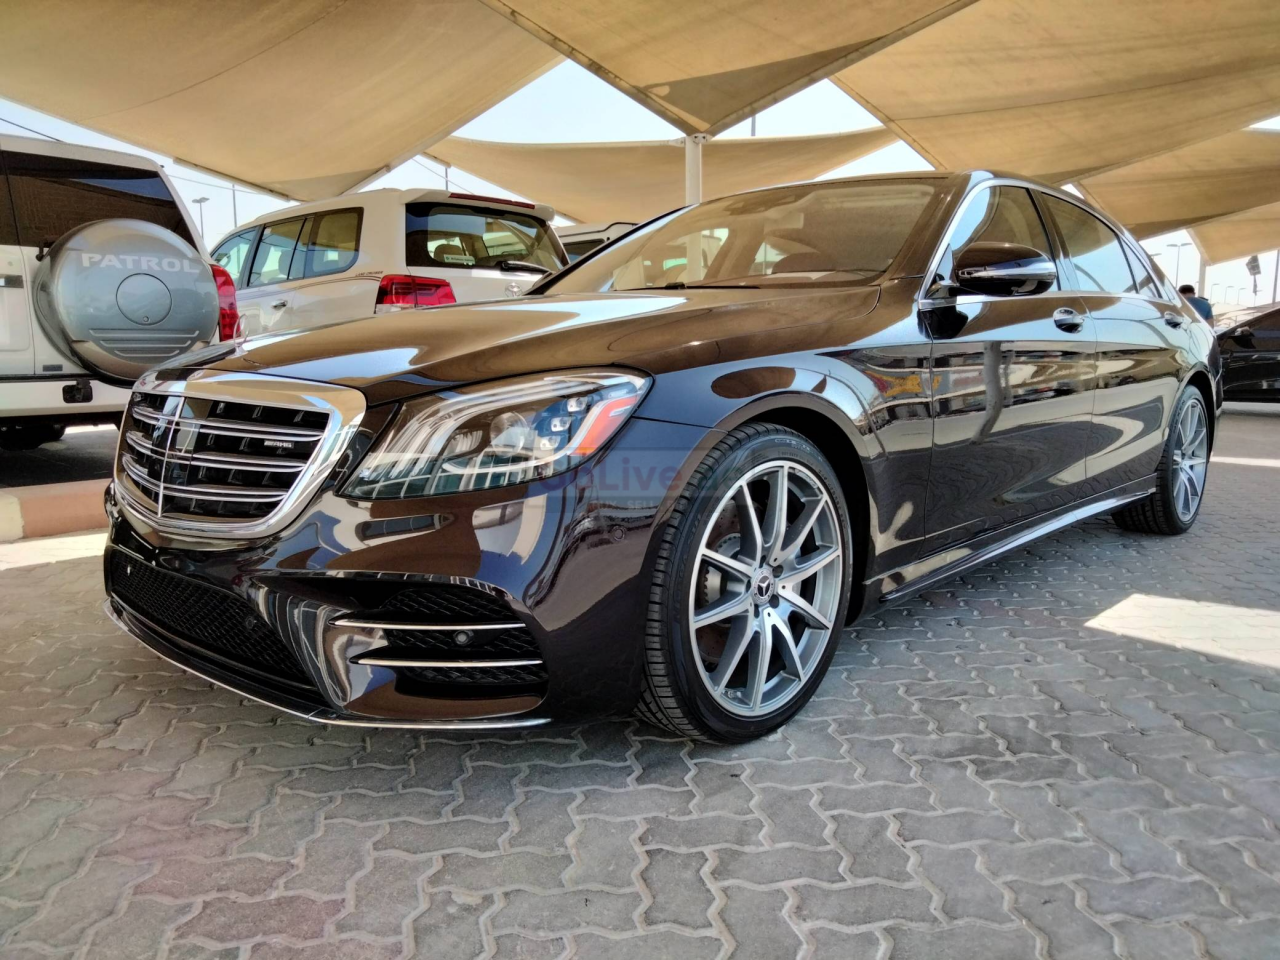 Mercedes Benz 500/560 2018 AED 325,000, Warranty, Full Option, Turbo, Sunroof